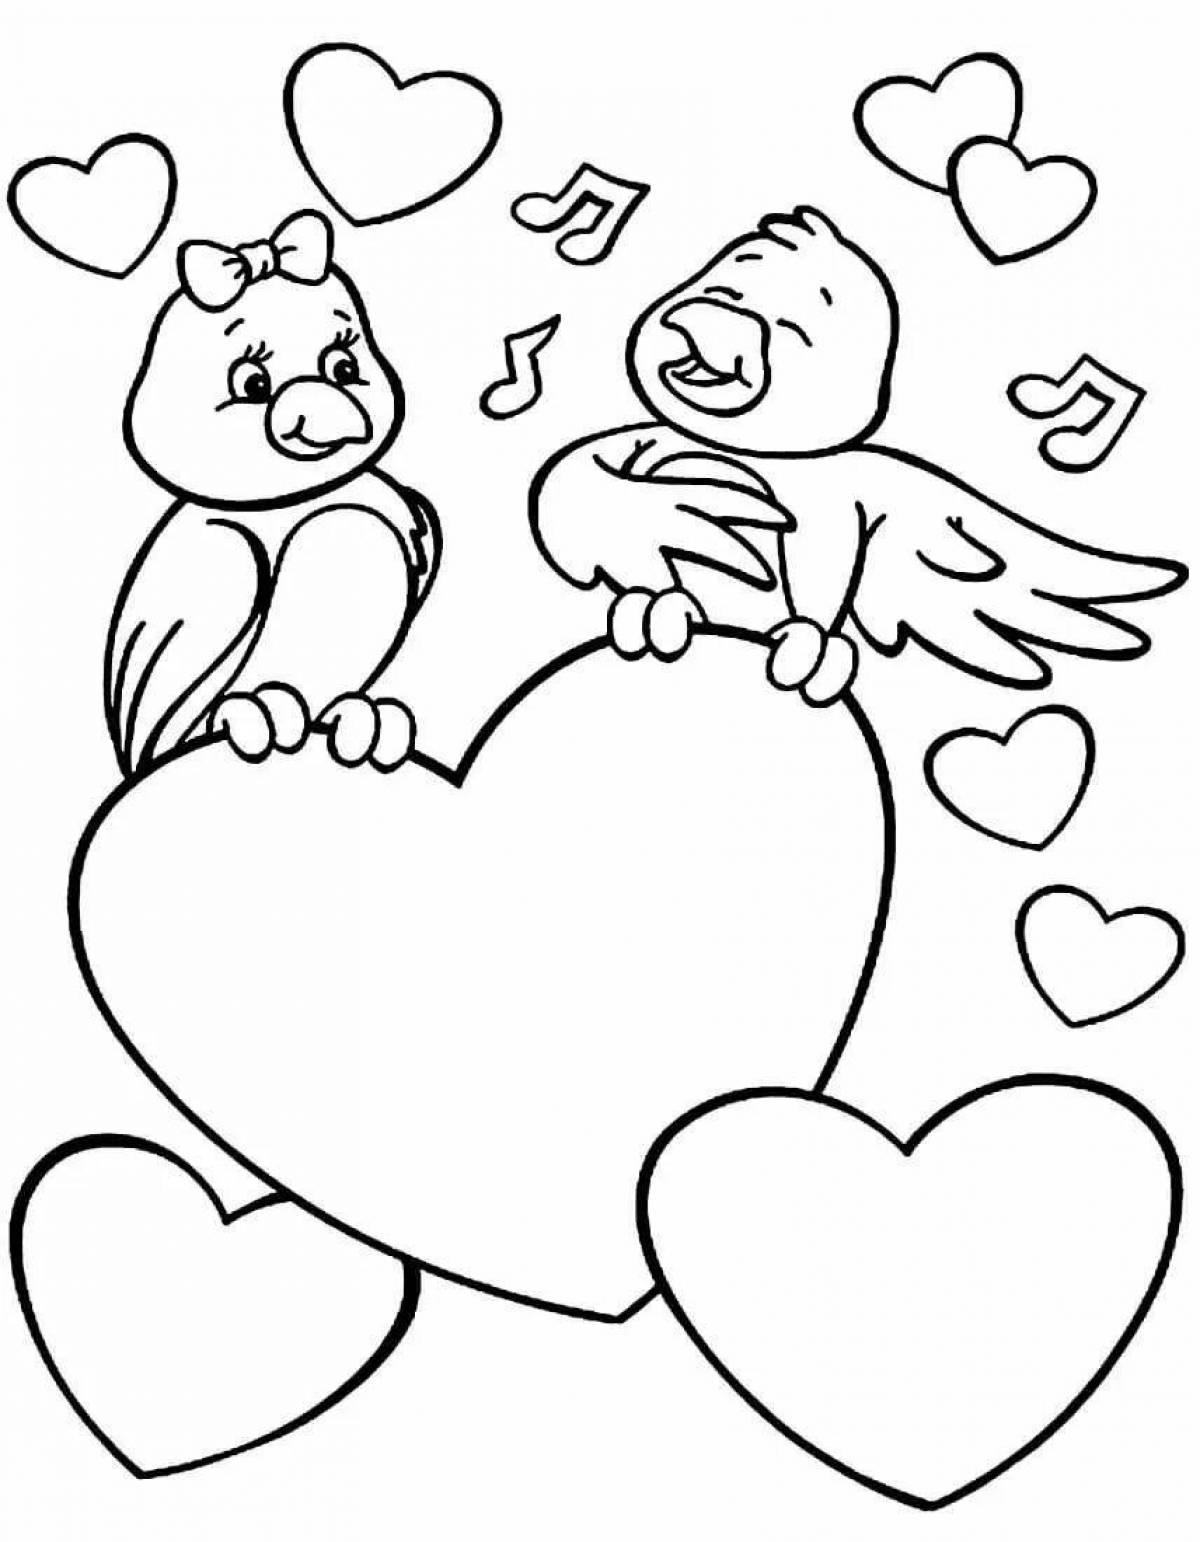 Coloring for Valentine's Day for children